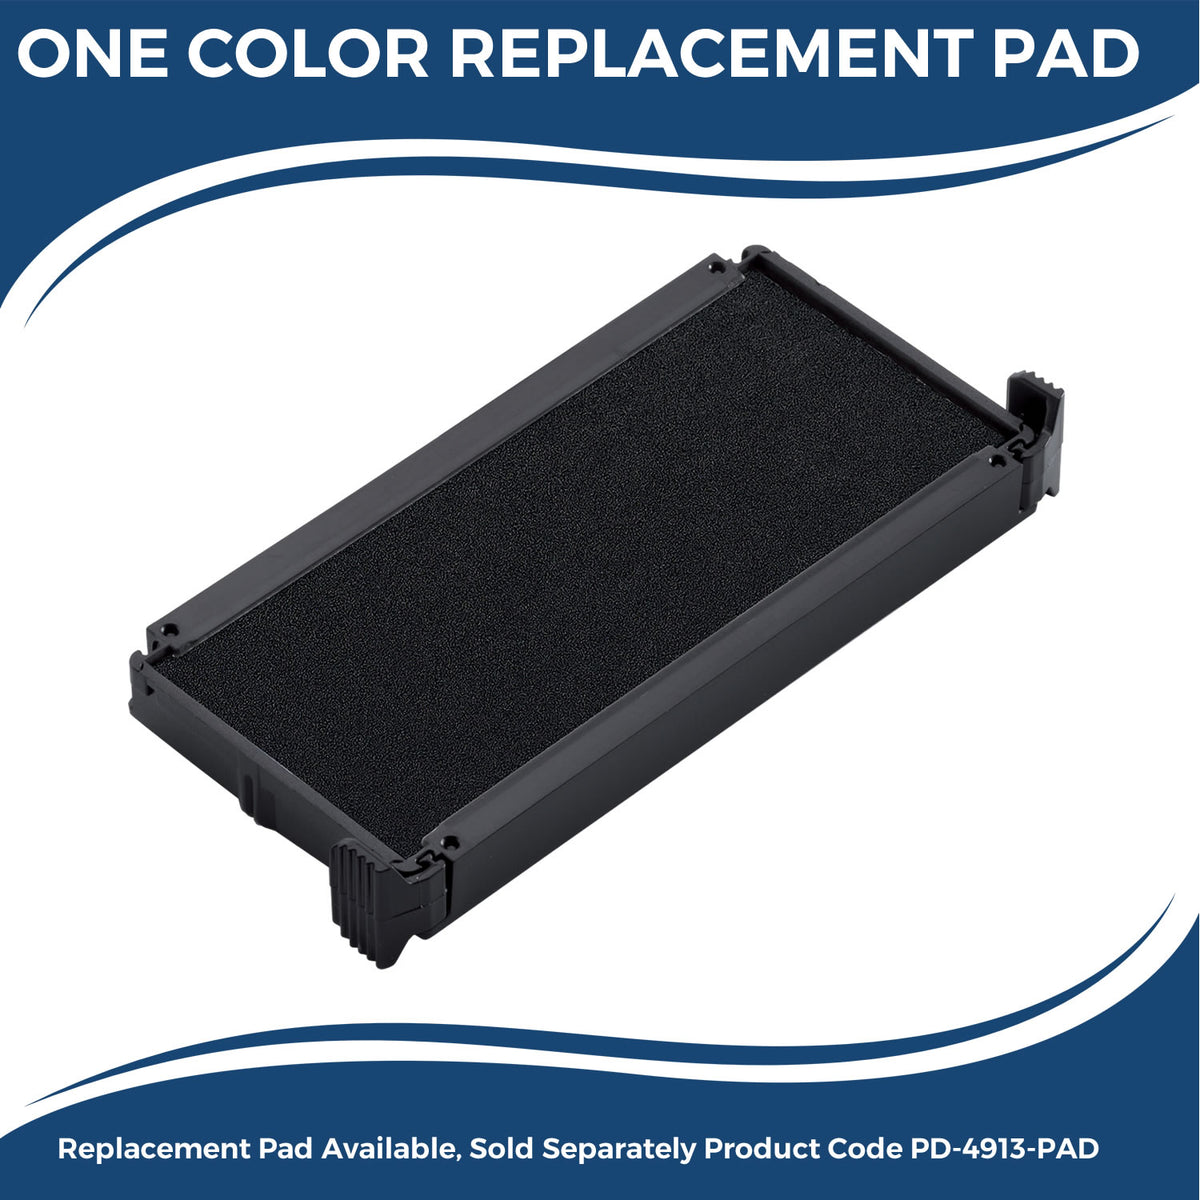 Large Self-Inking Cancelado Stamp 5533S Large Replacment Pad